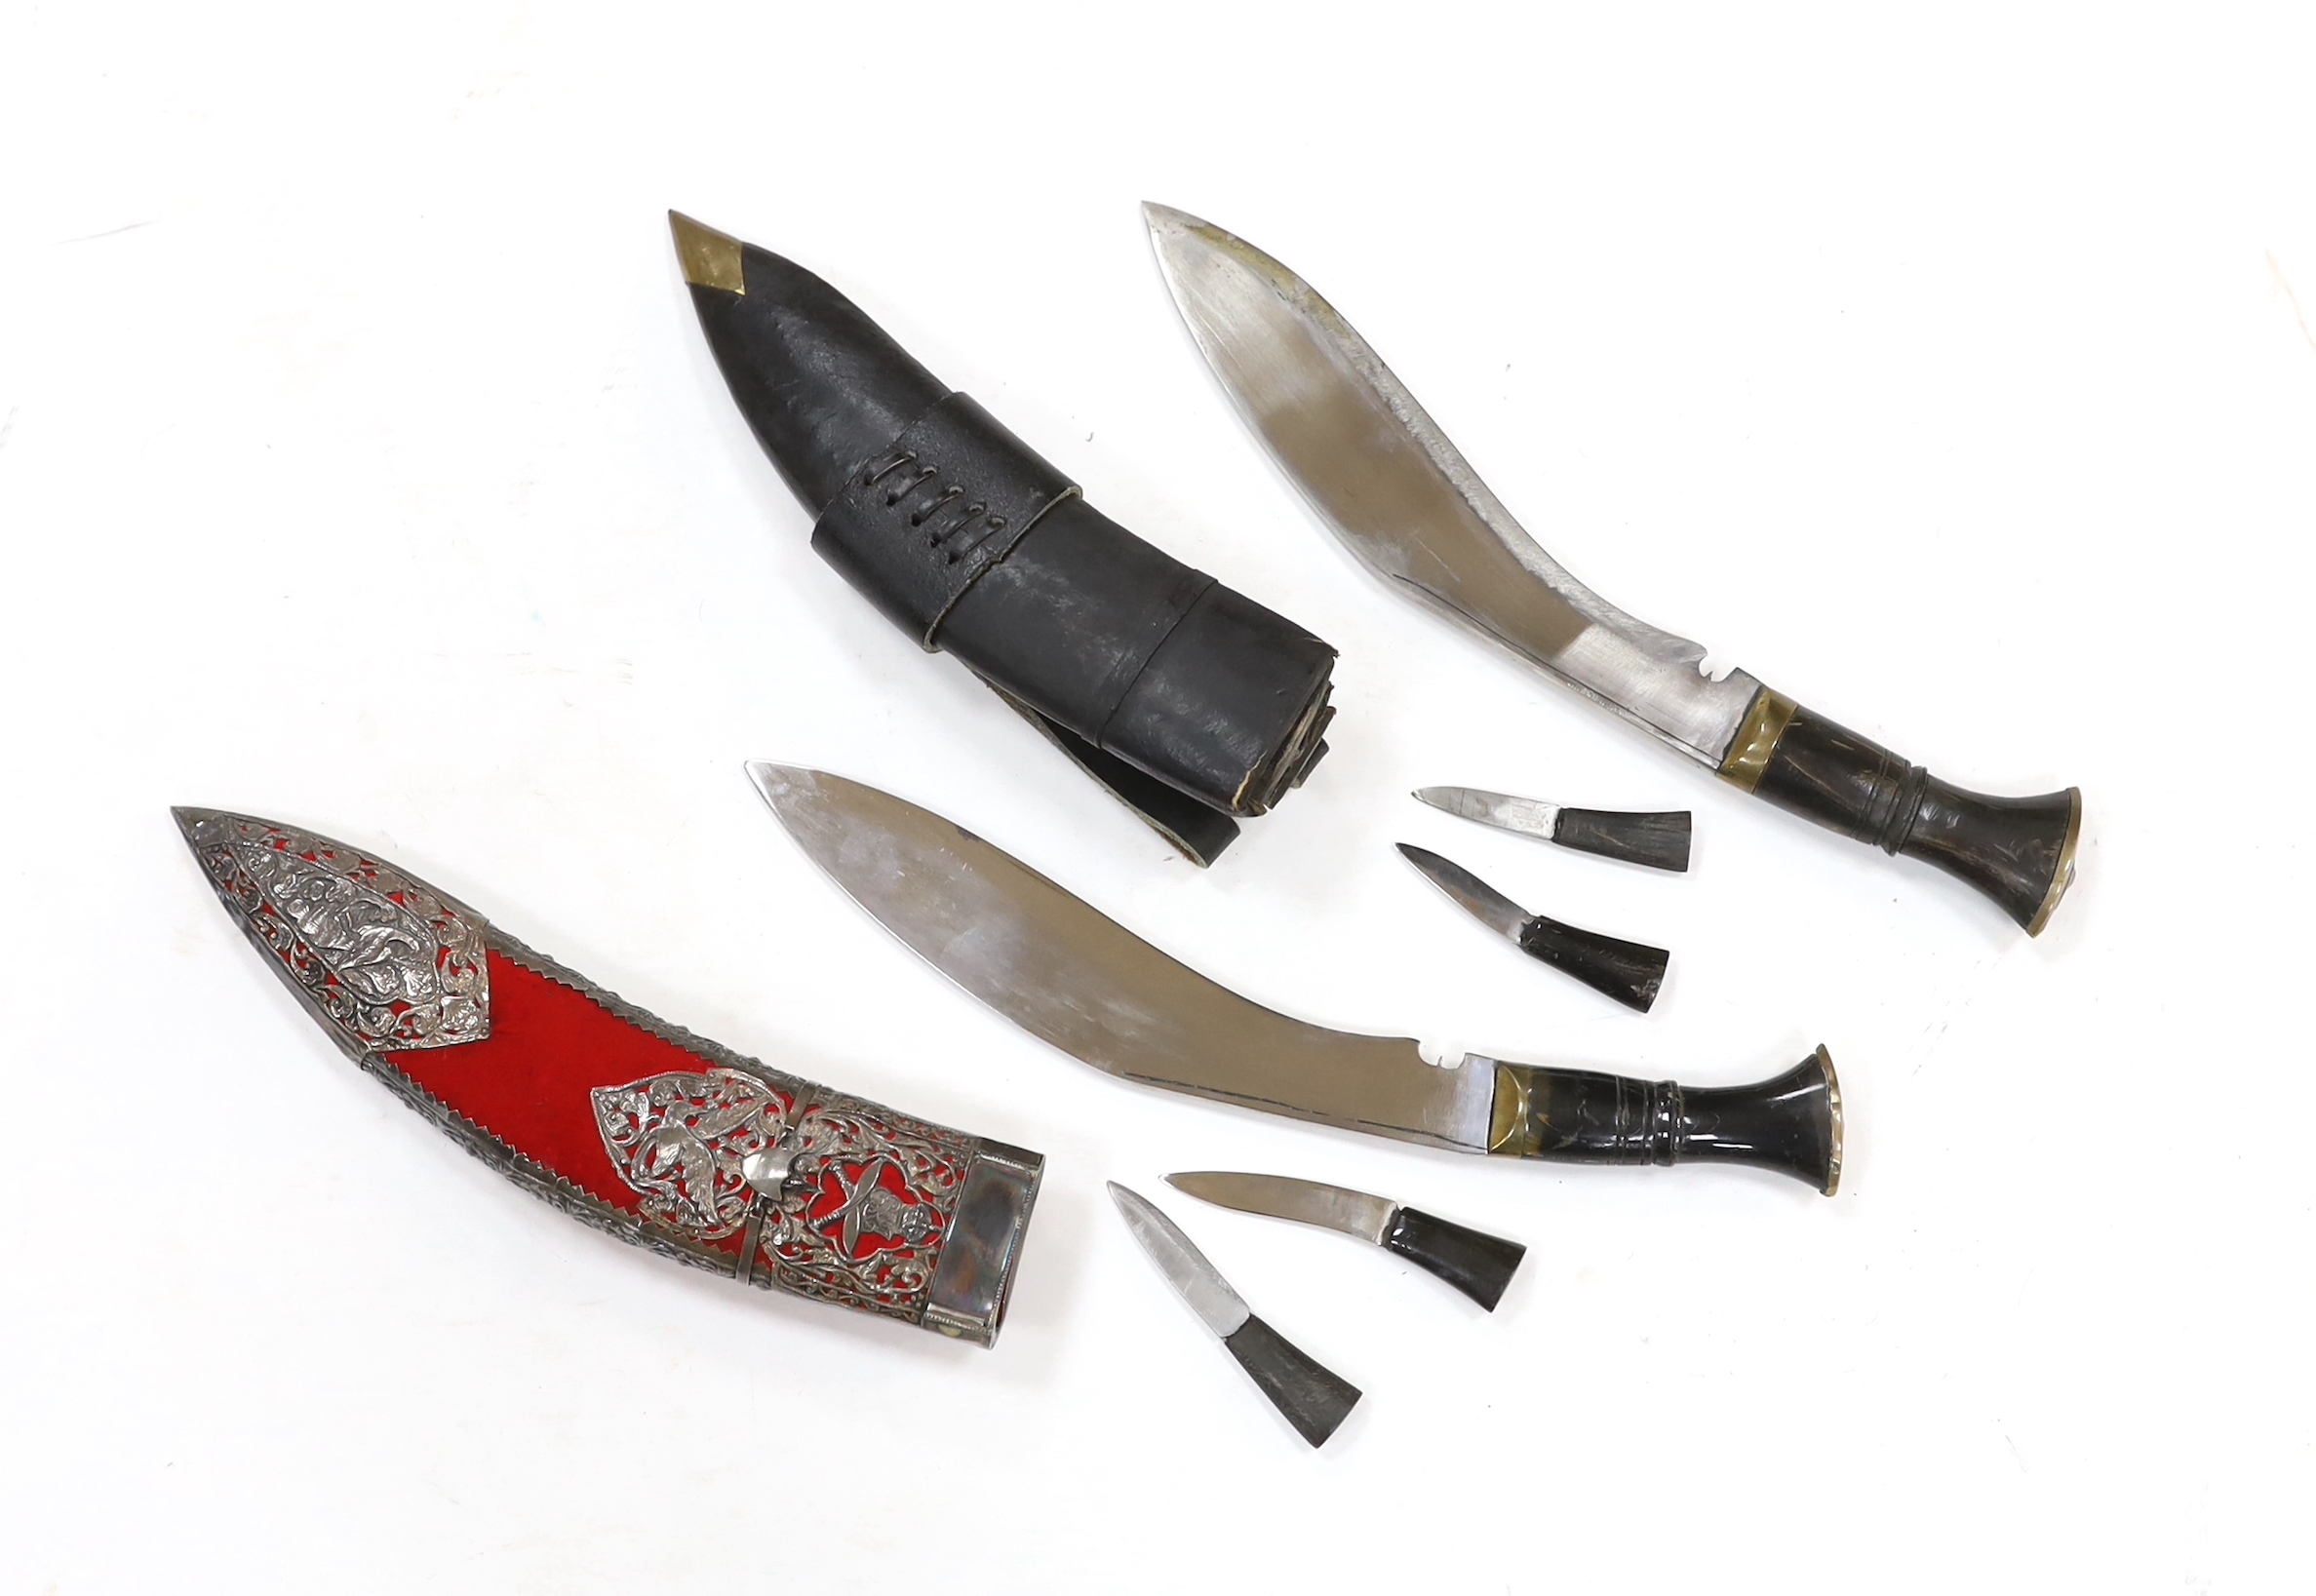 Two Kukri daggers in scabbards also containing two smaller daggers